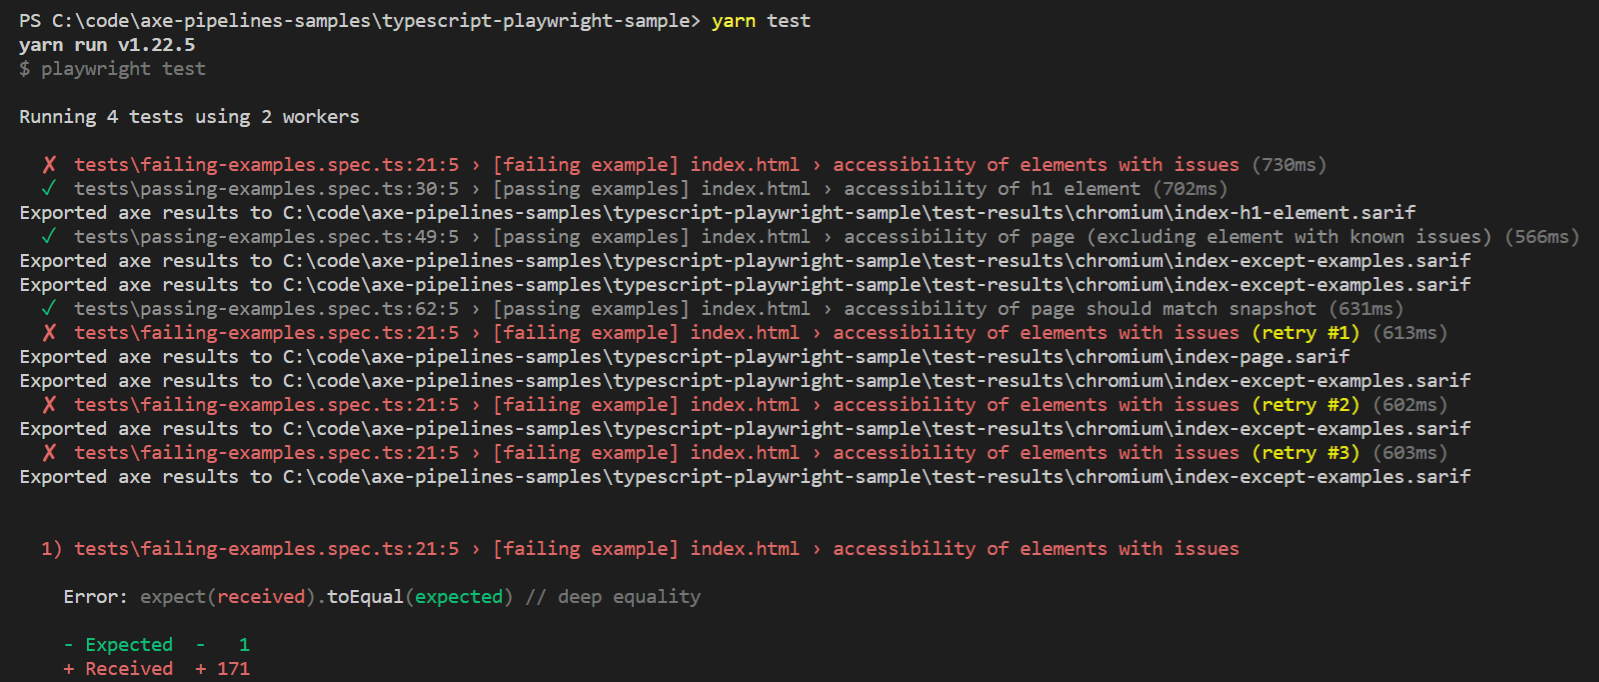 Screenshot of yarn test command showing 3 tests passing and 1 test failed